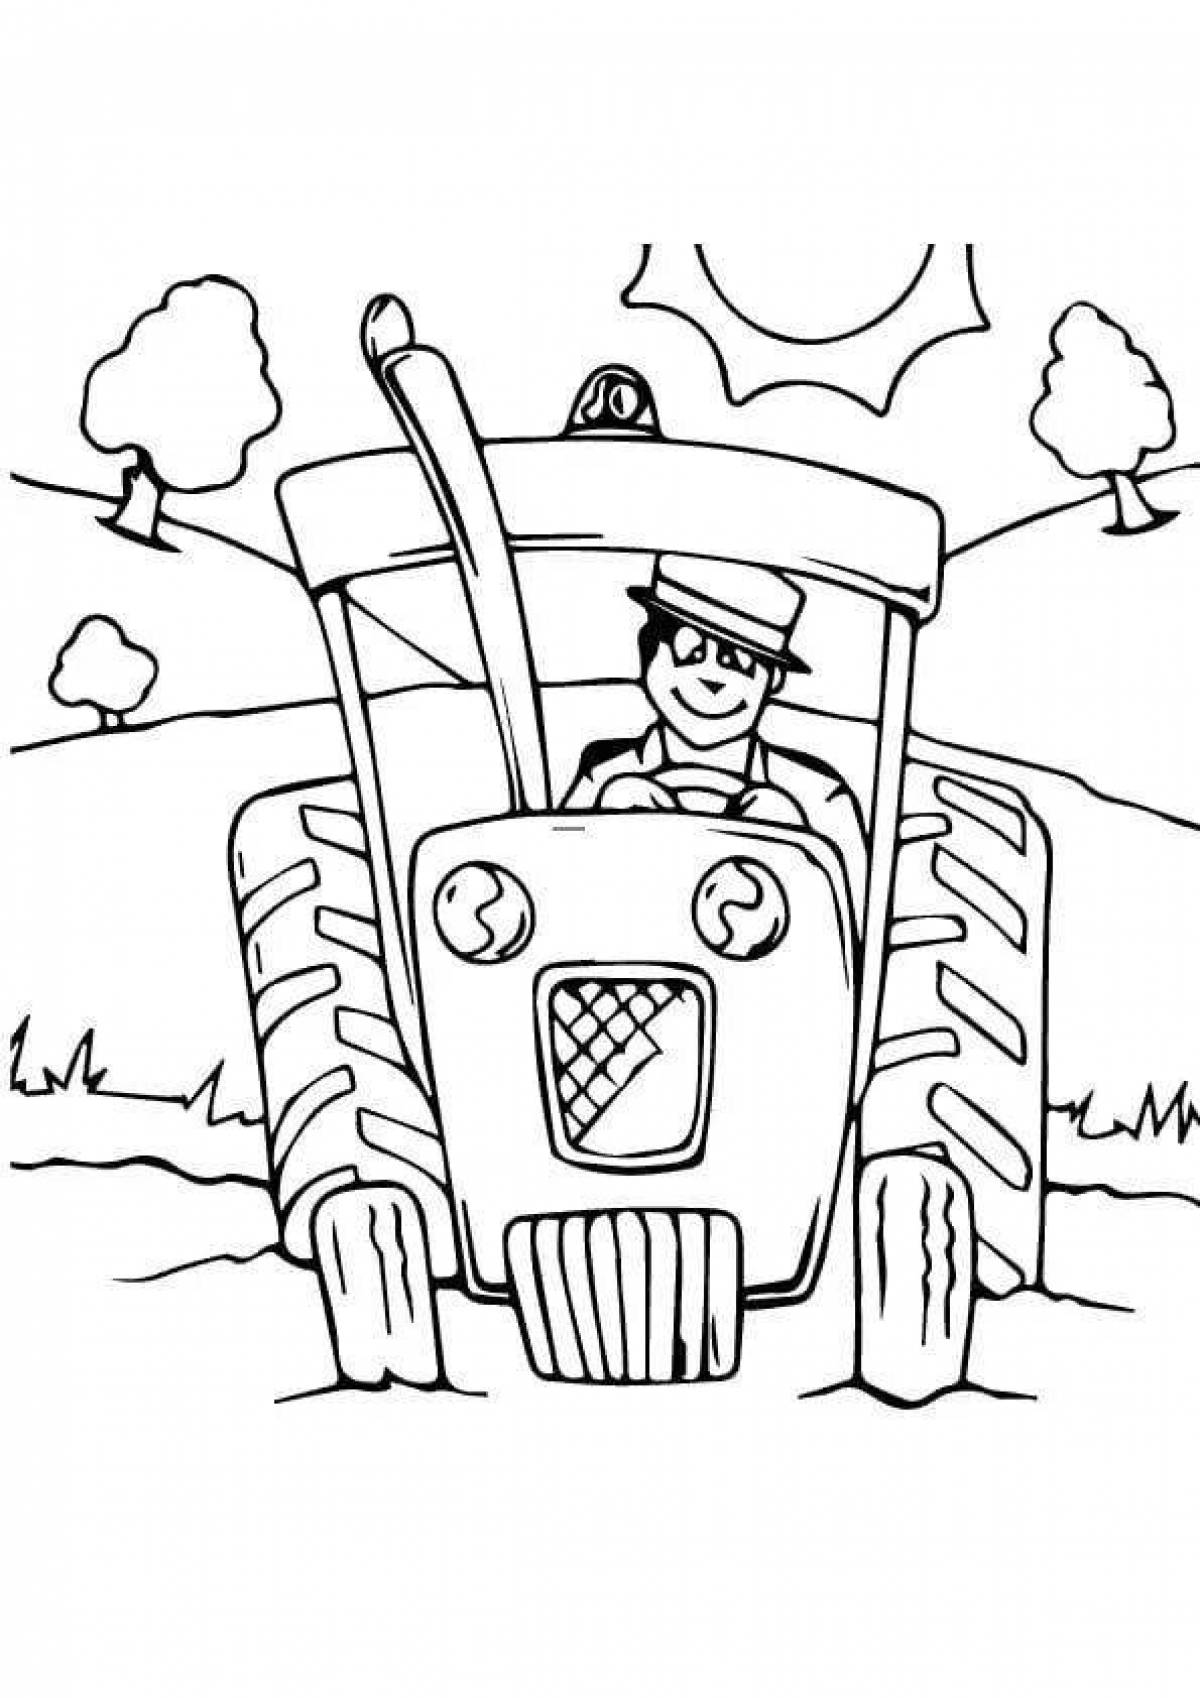 Coloring page funny tractor driver